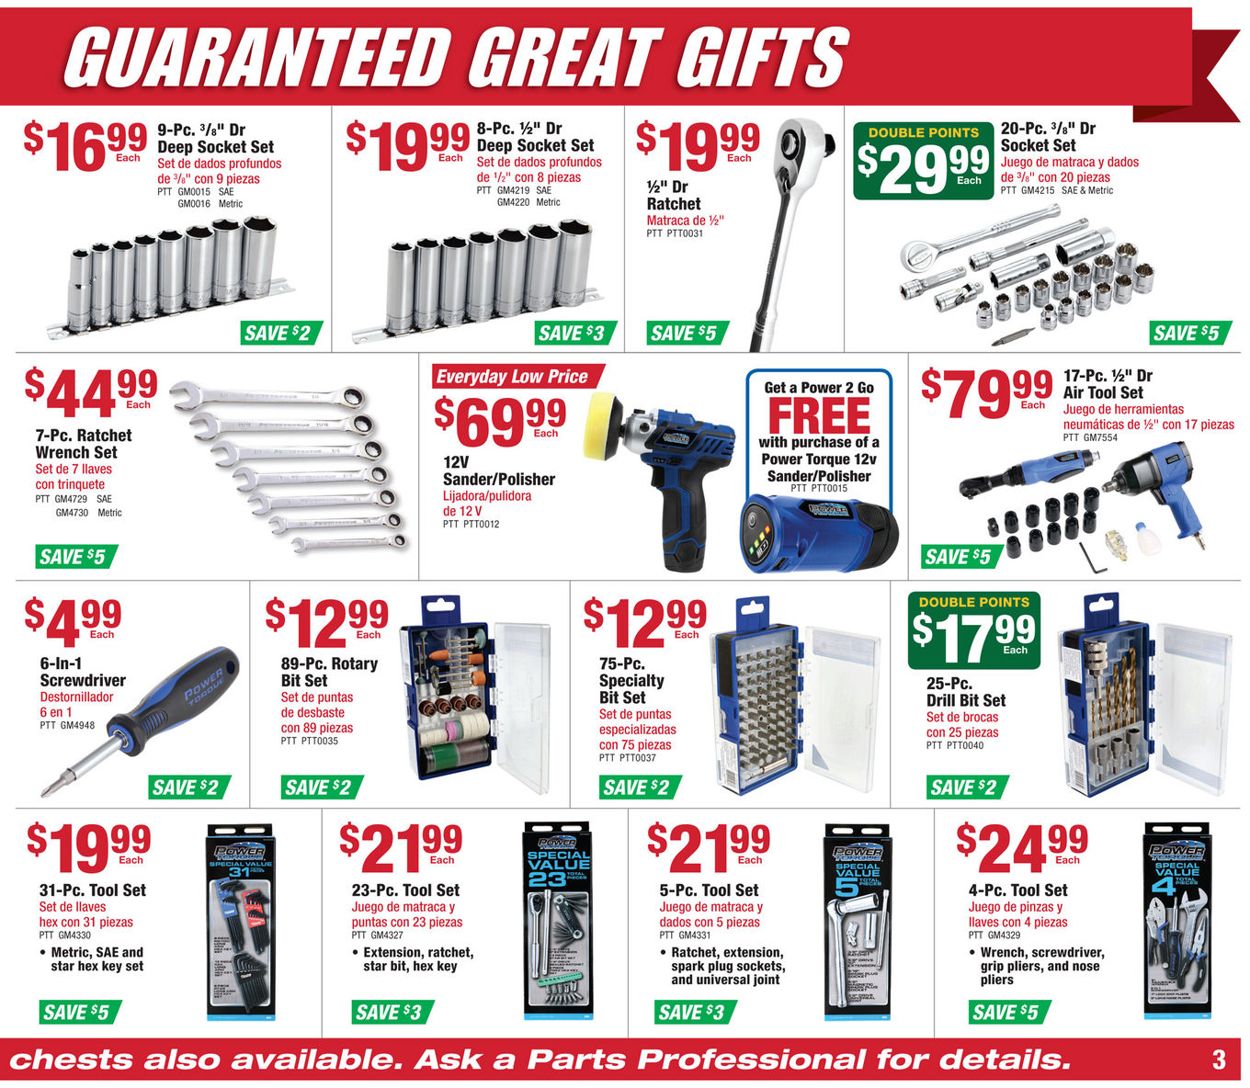 O'Reilly Auto Parts - HOLIDAY GIFT GUIDE 2019 Weekly Ad Circular - valid 11/27-12/24/2019 (Page 3)